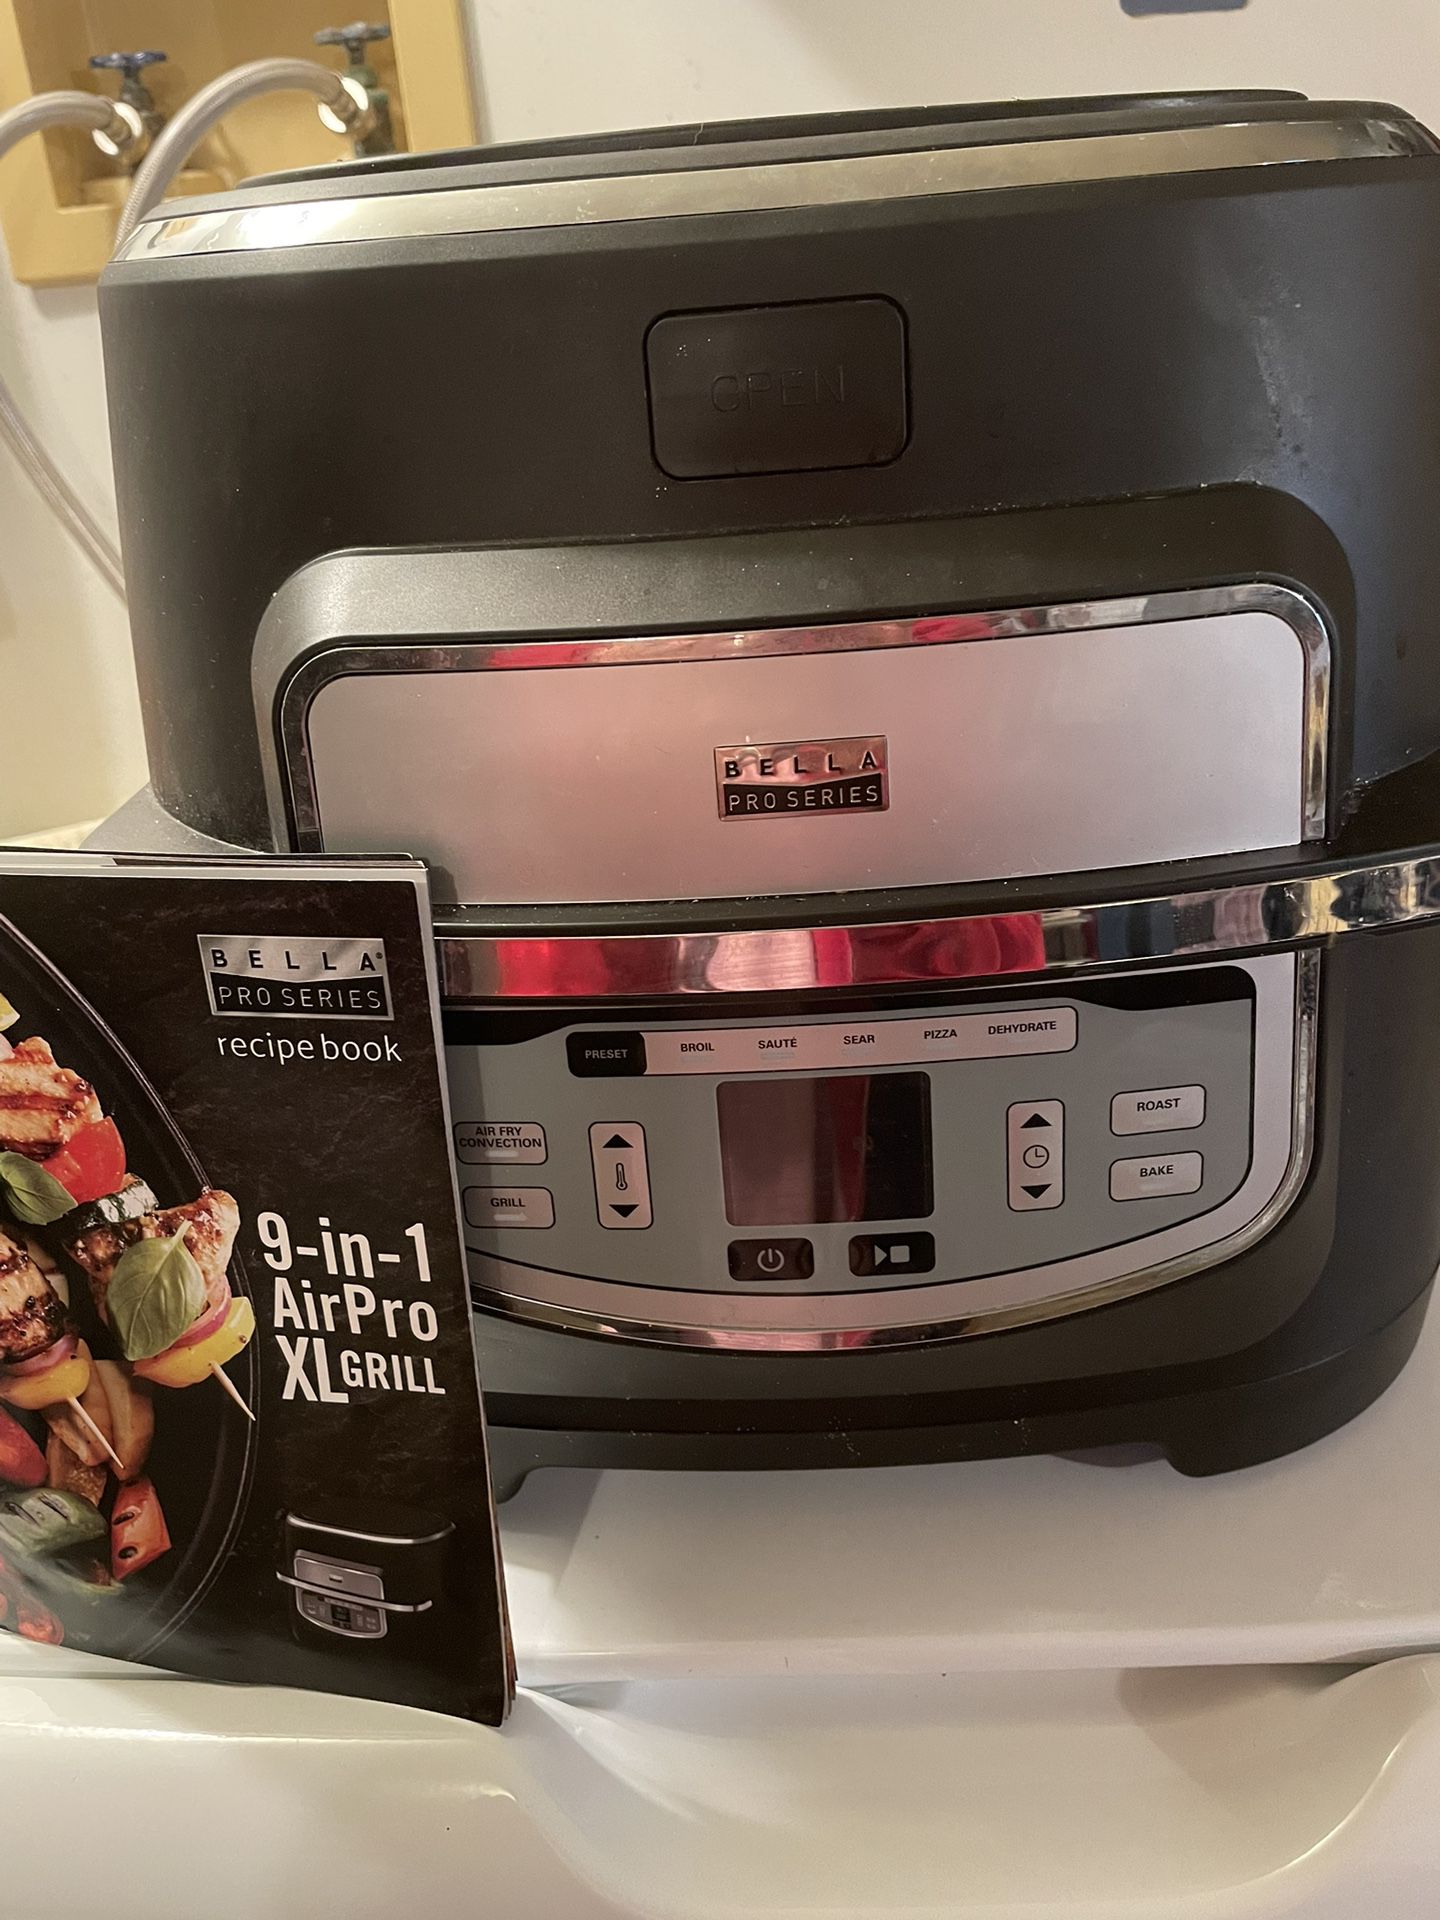 Ninja Air Fryer for Sale in West Chester Township, OH - OfferUp